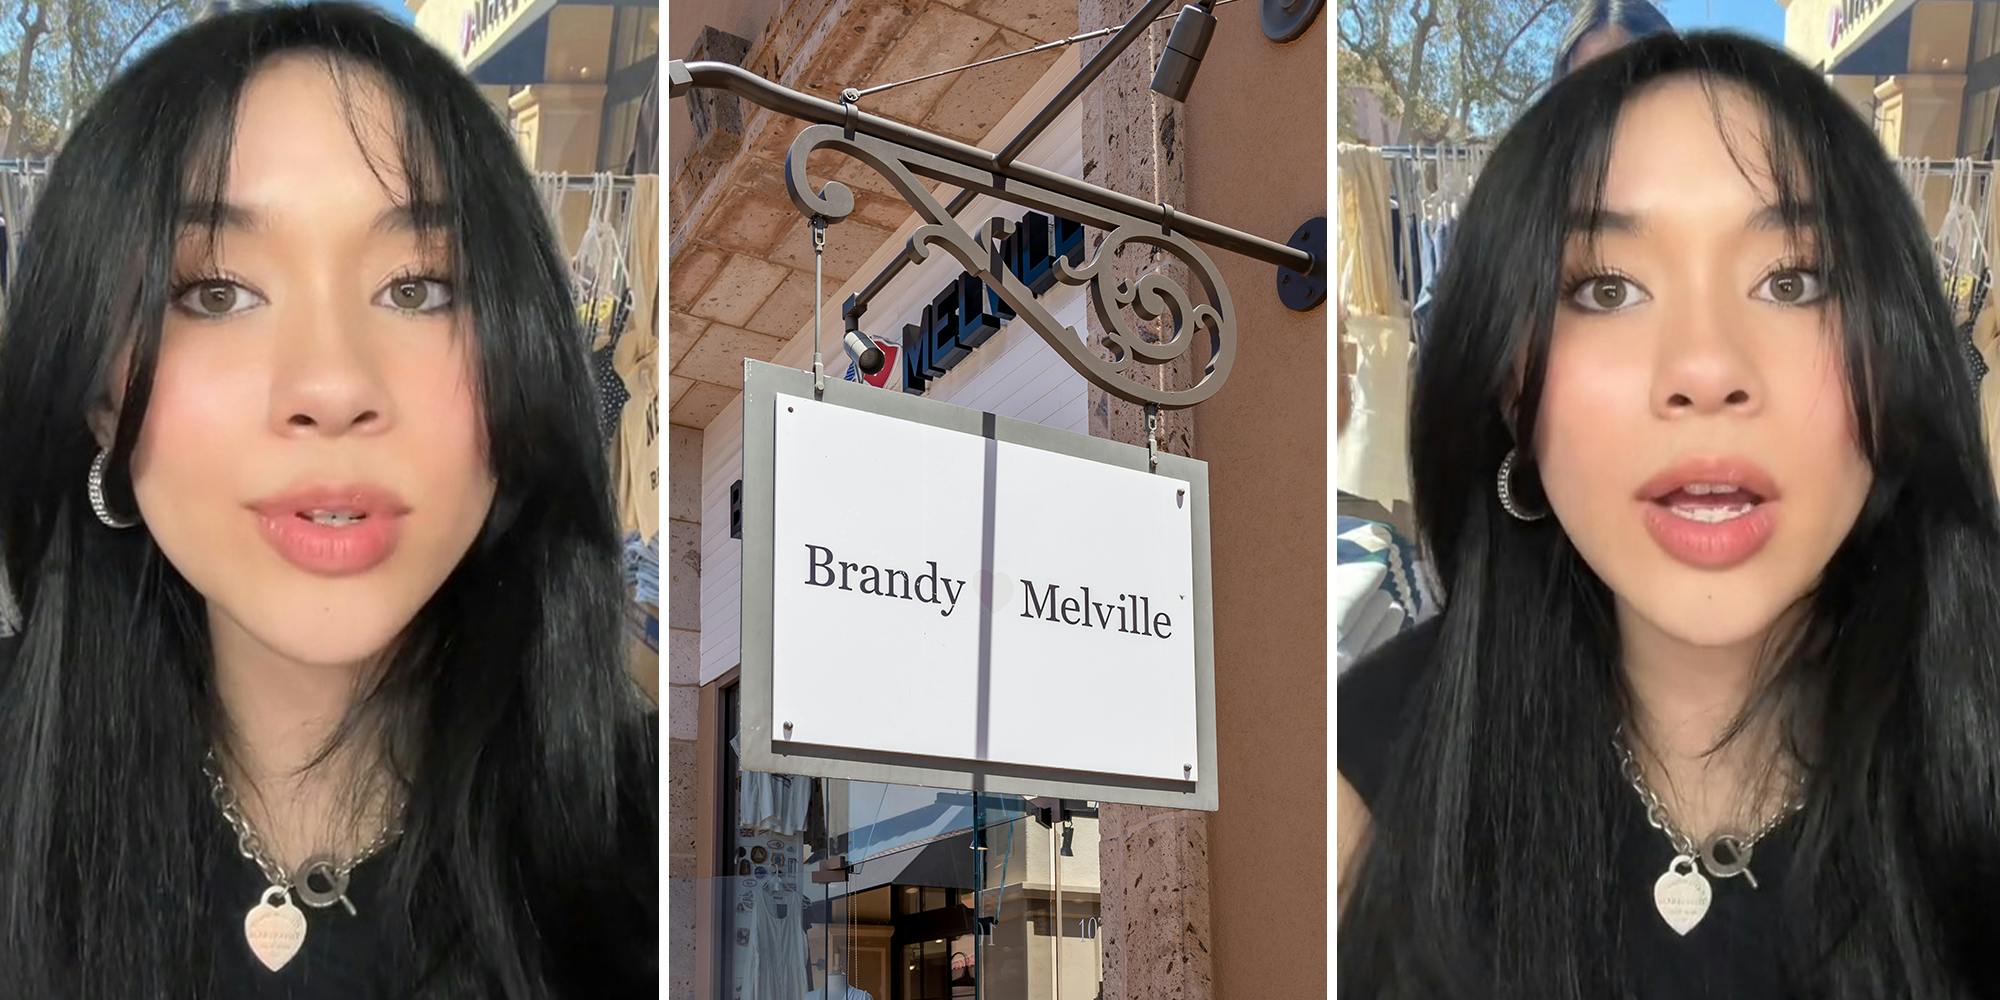 Ex-Brandy Melville worker says she had to take photos of her chest every day.